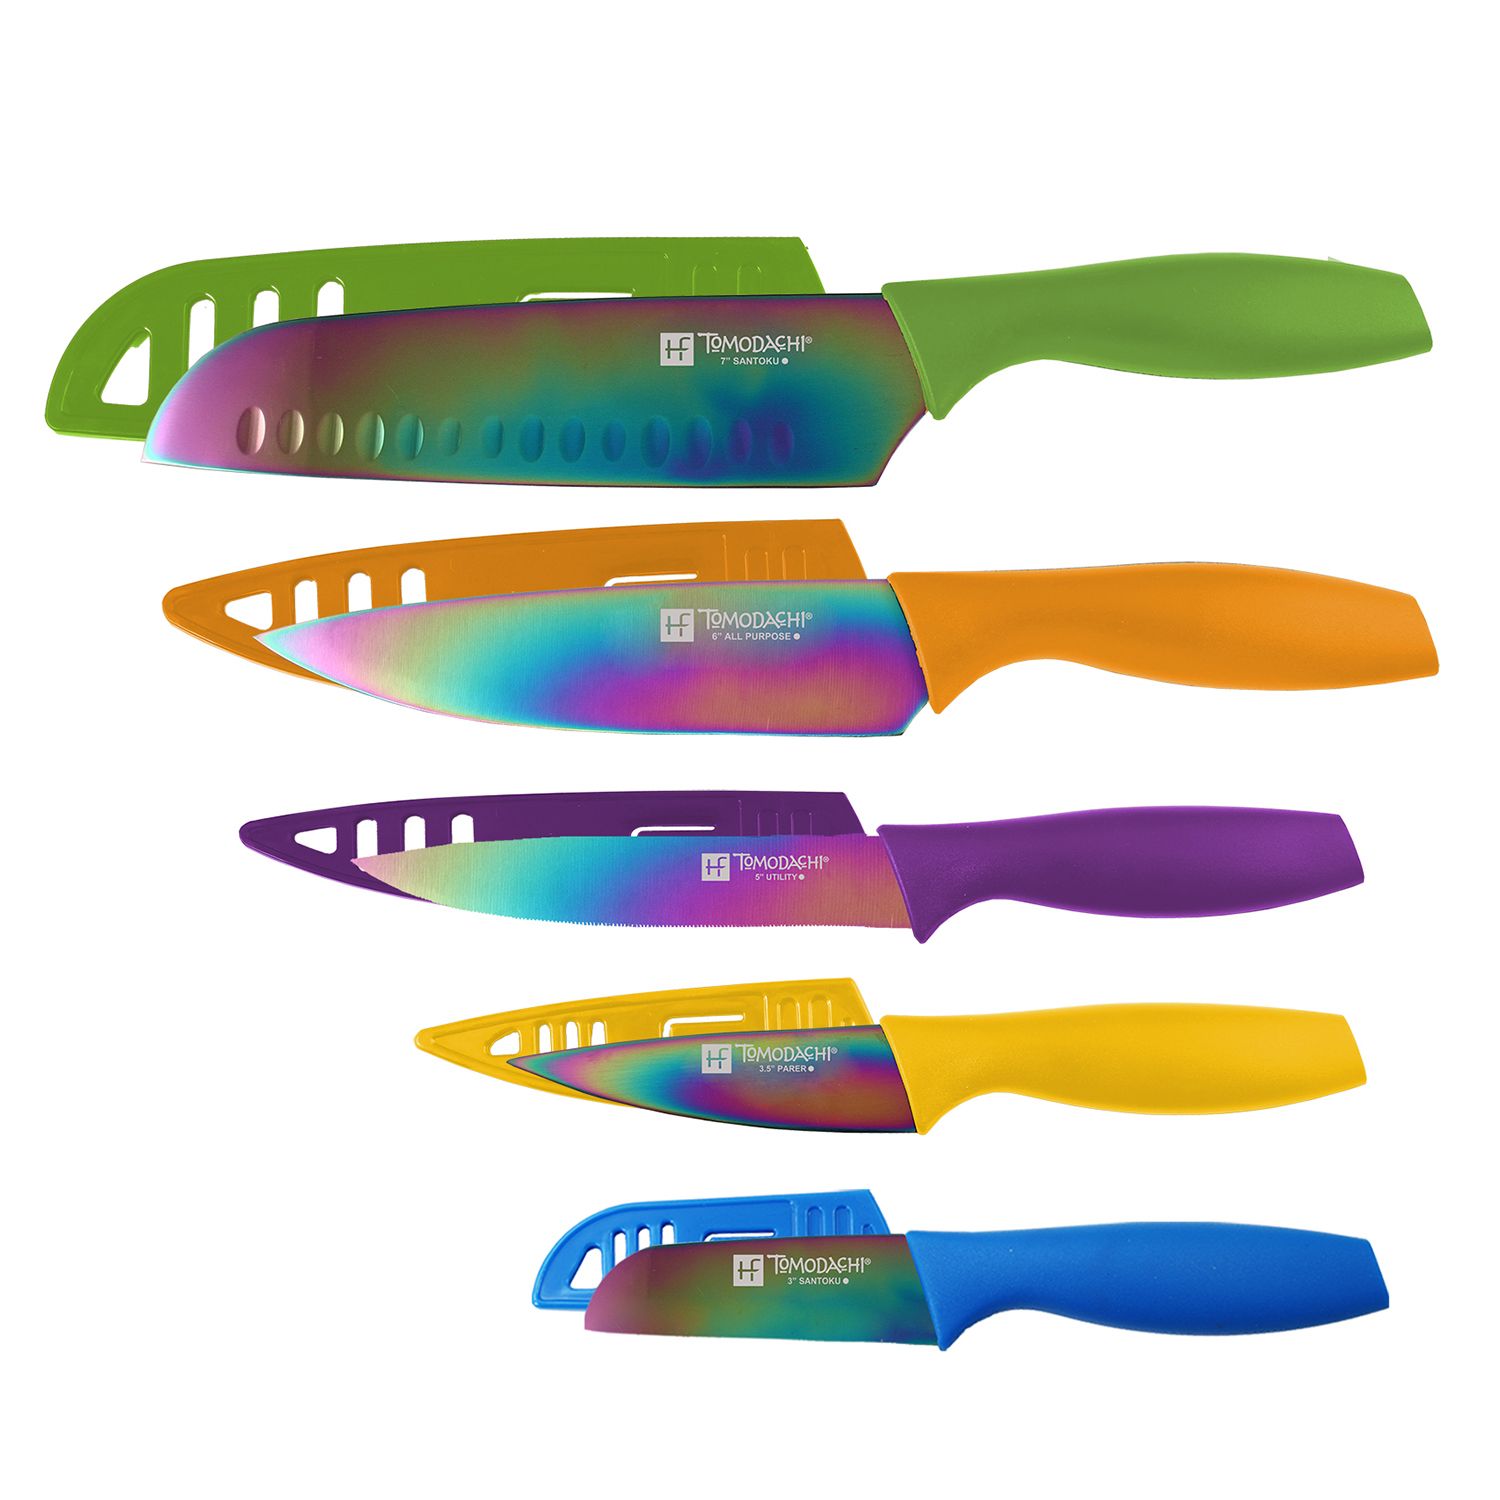 YOLEYA 15 Piece Kitchen Steel Knife Set with Block and Non Stick